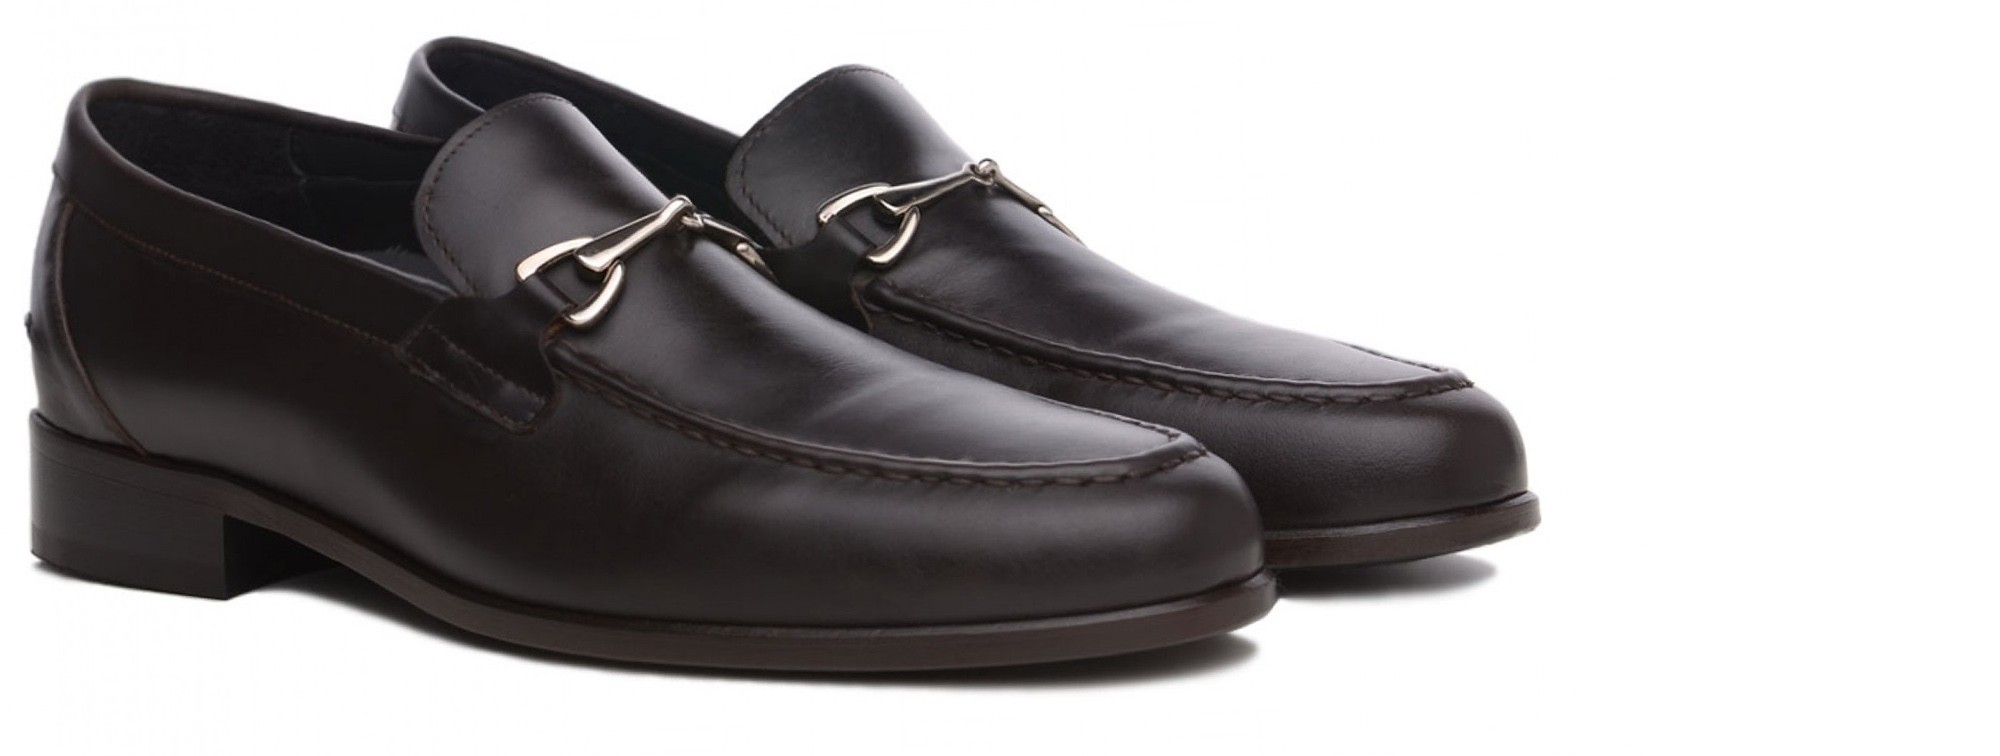 defeat George Hanbury They are Vichy Elevator Shoes | Elevator loafers GuidoMaggi